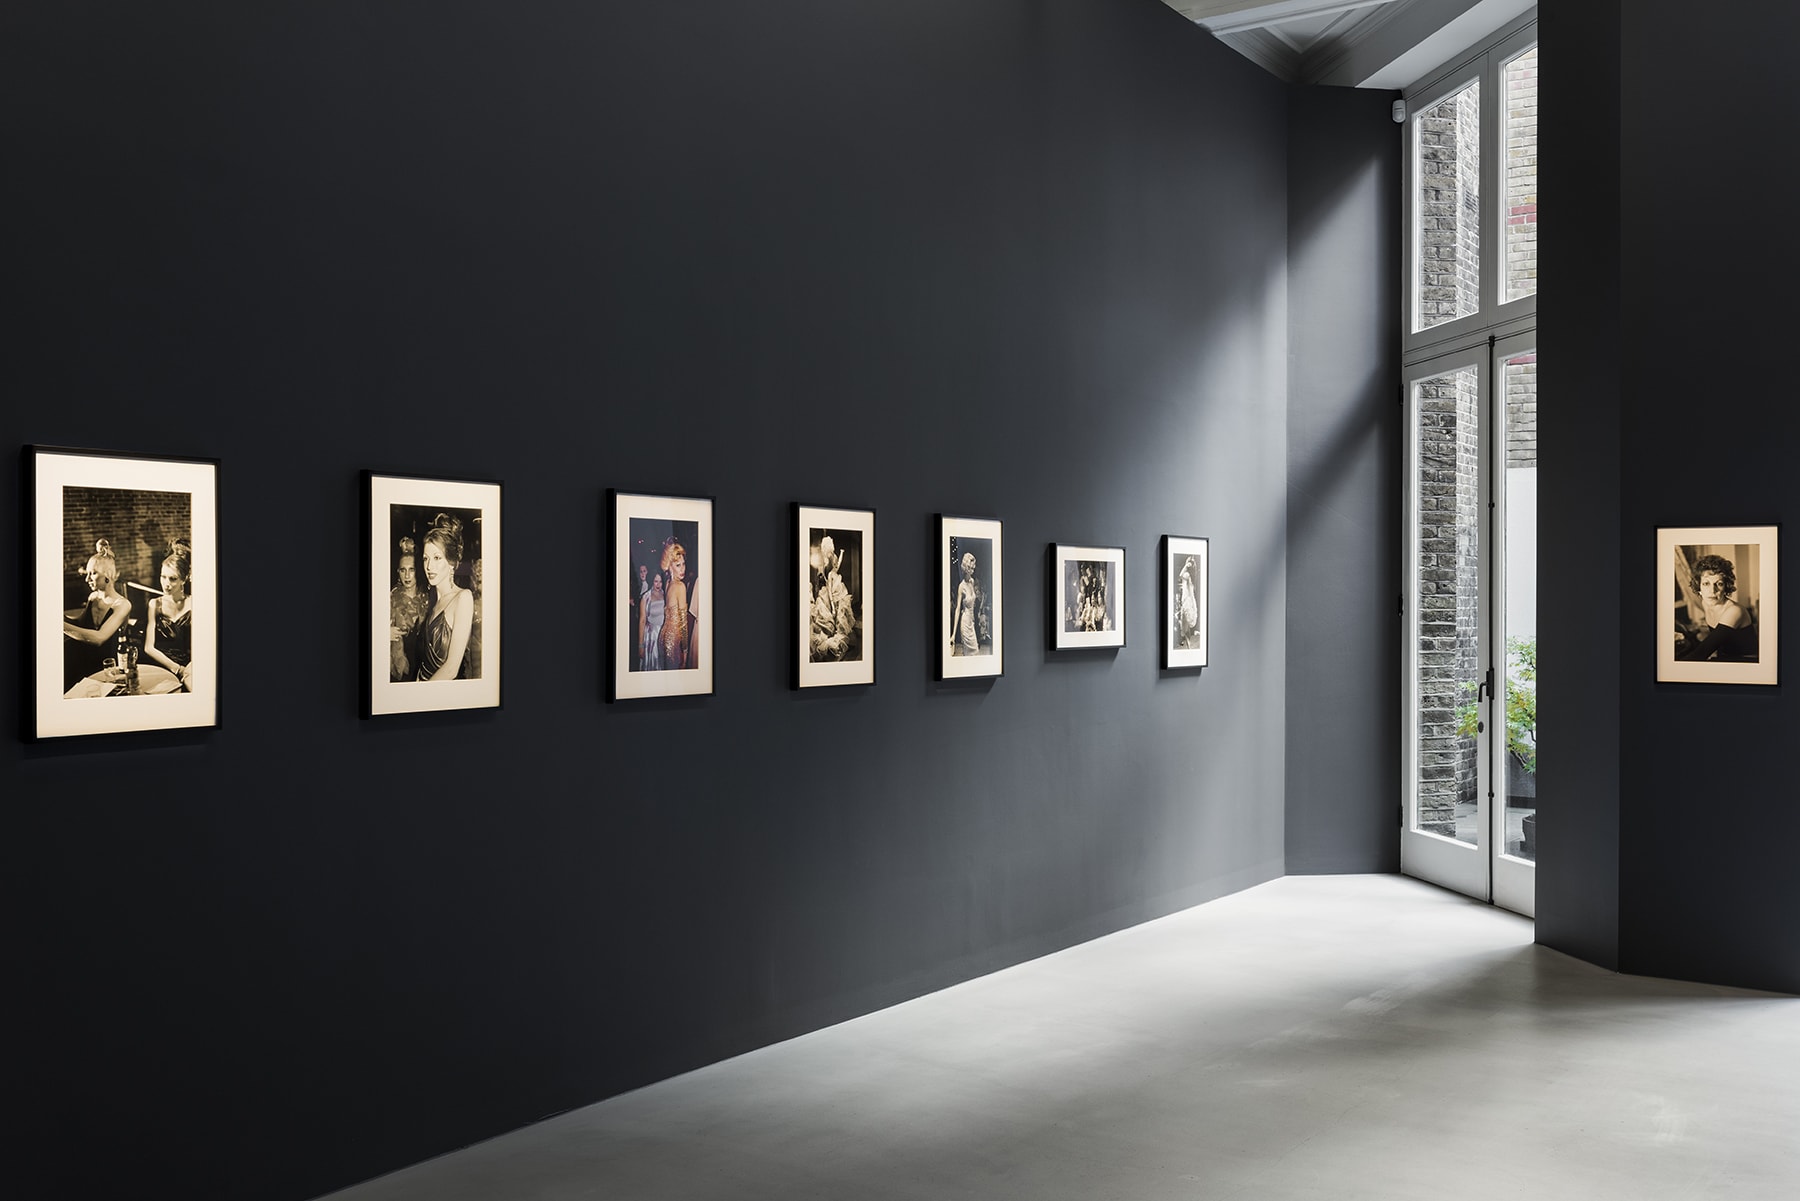 8 framed photographs hanging on a dark grey wall with a glass door in the center. 